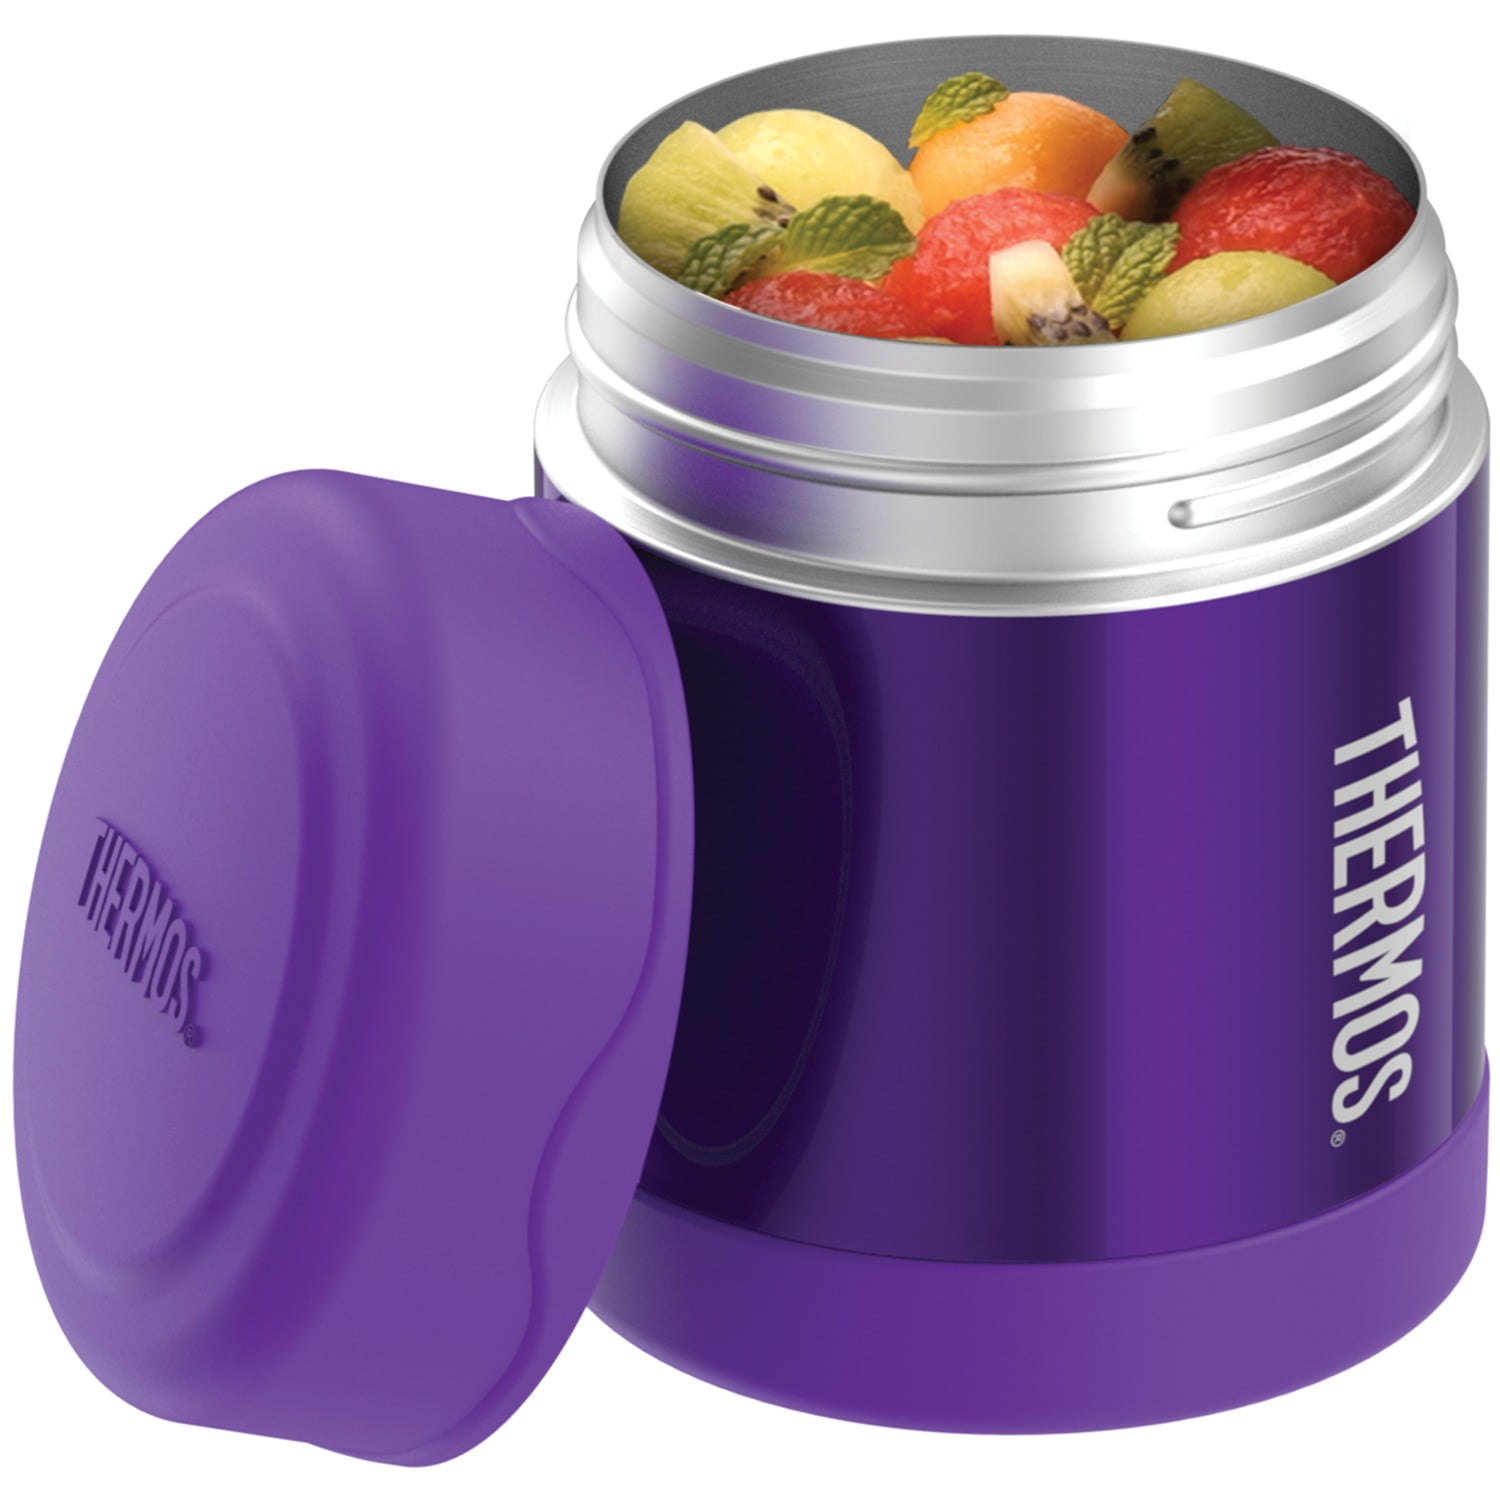 Thermos Stainless Steel Food Jar - Teal, 10 oz - Fred Meyer